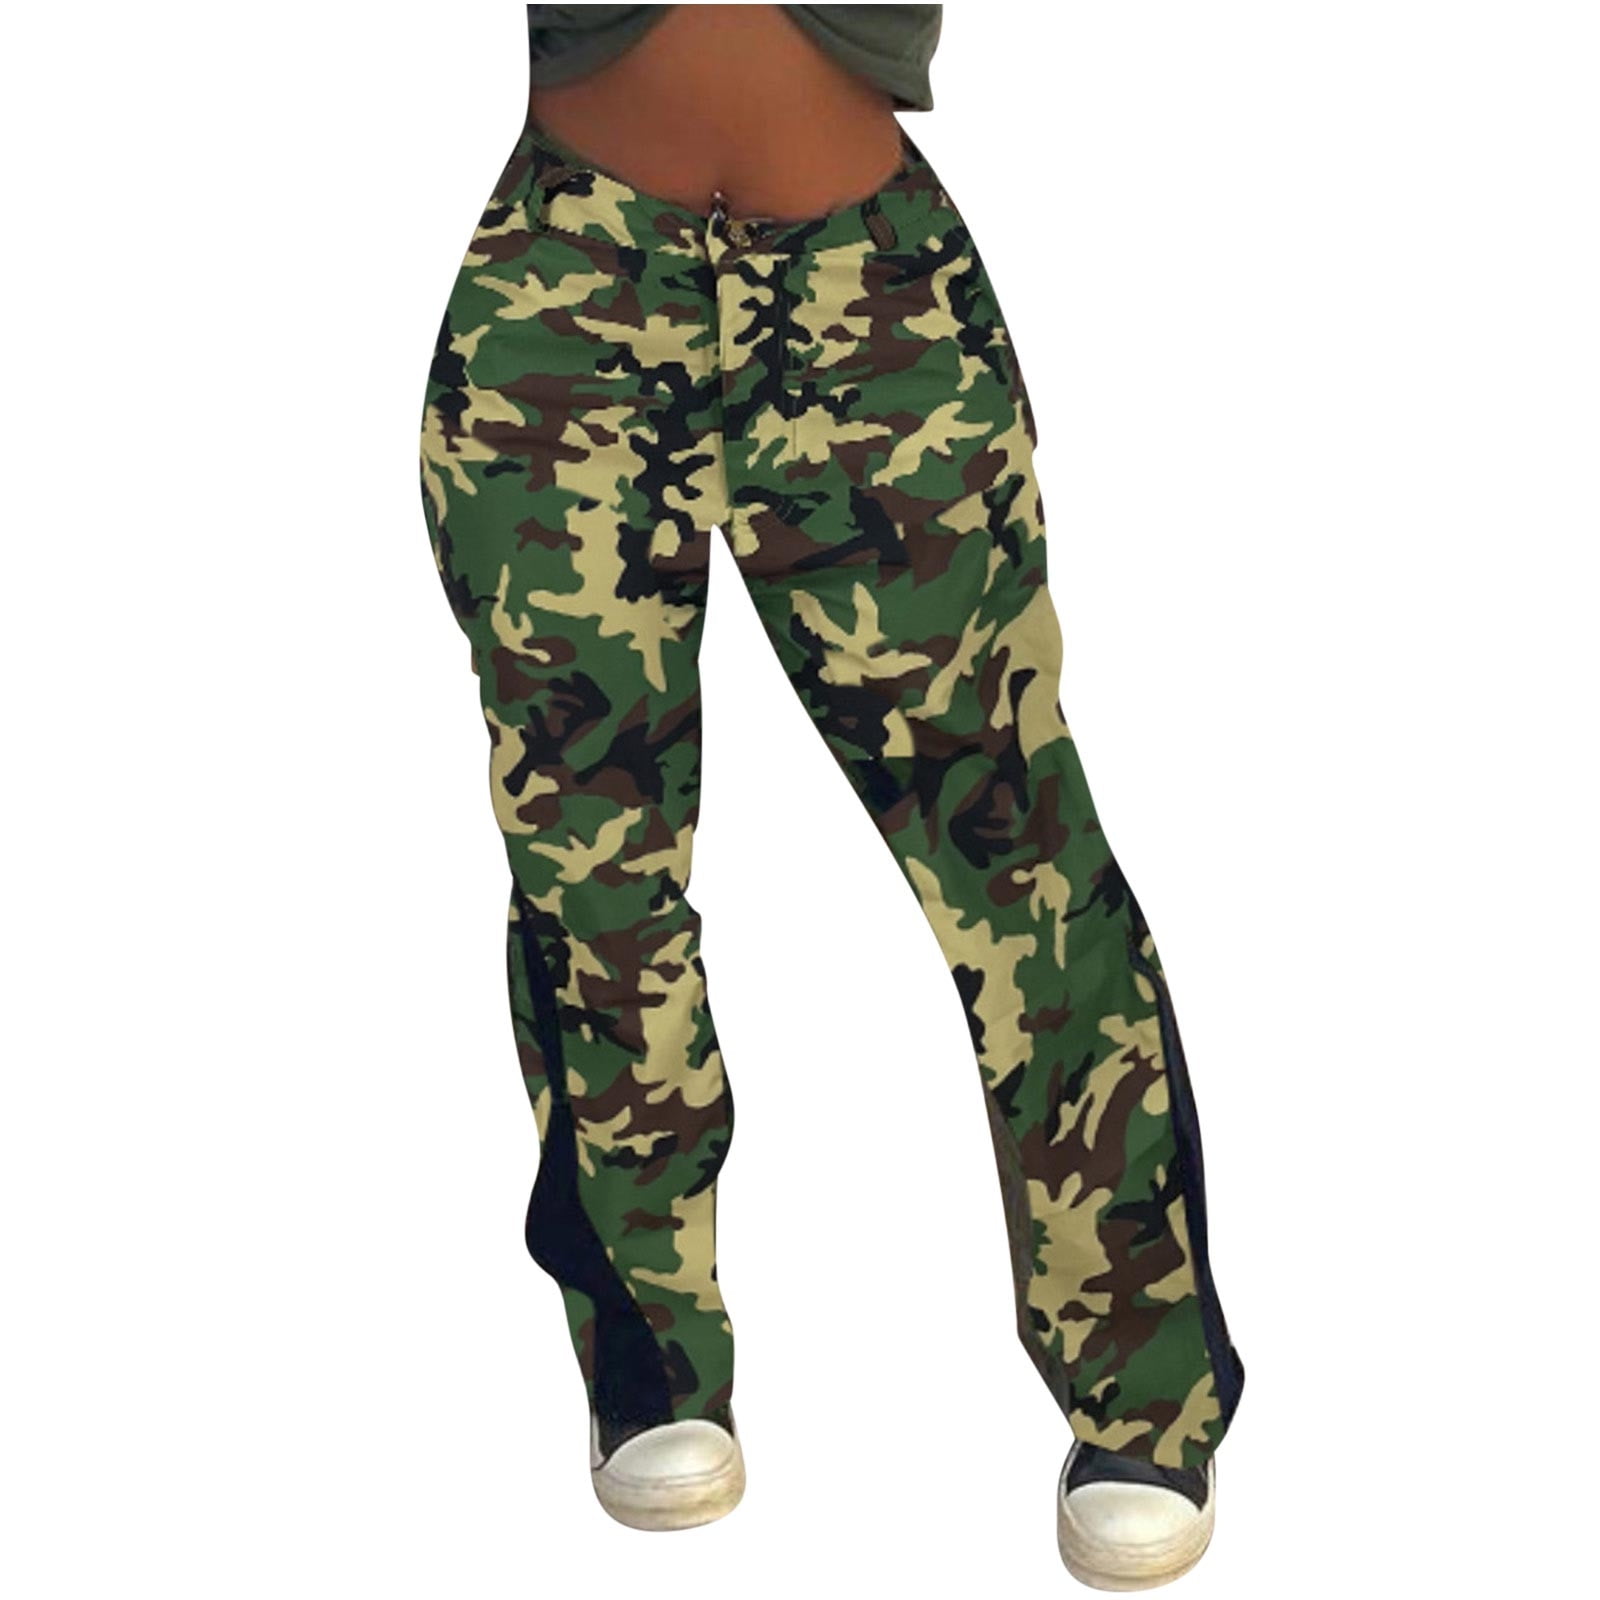 Owordtank Womens Streetwear Camo Pants with Pockets Casual Camouflage ...